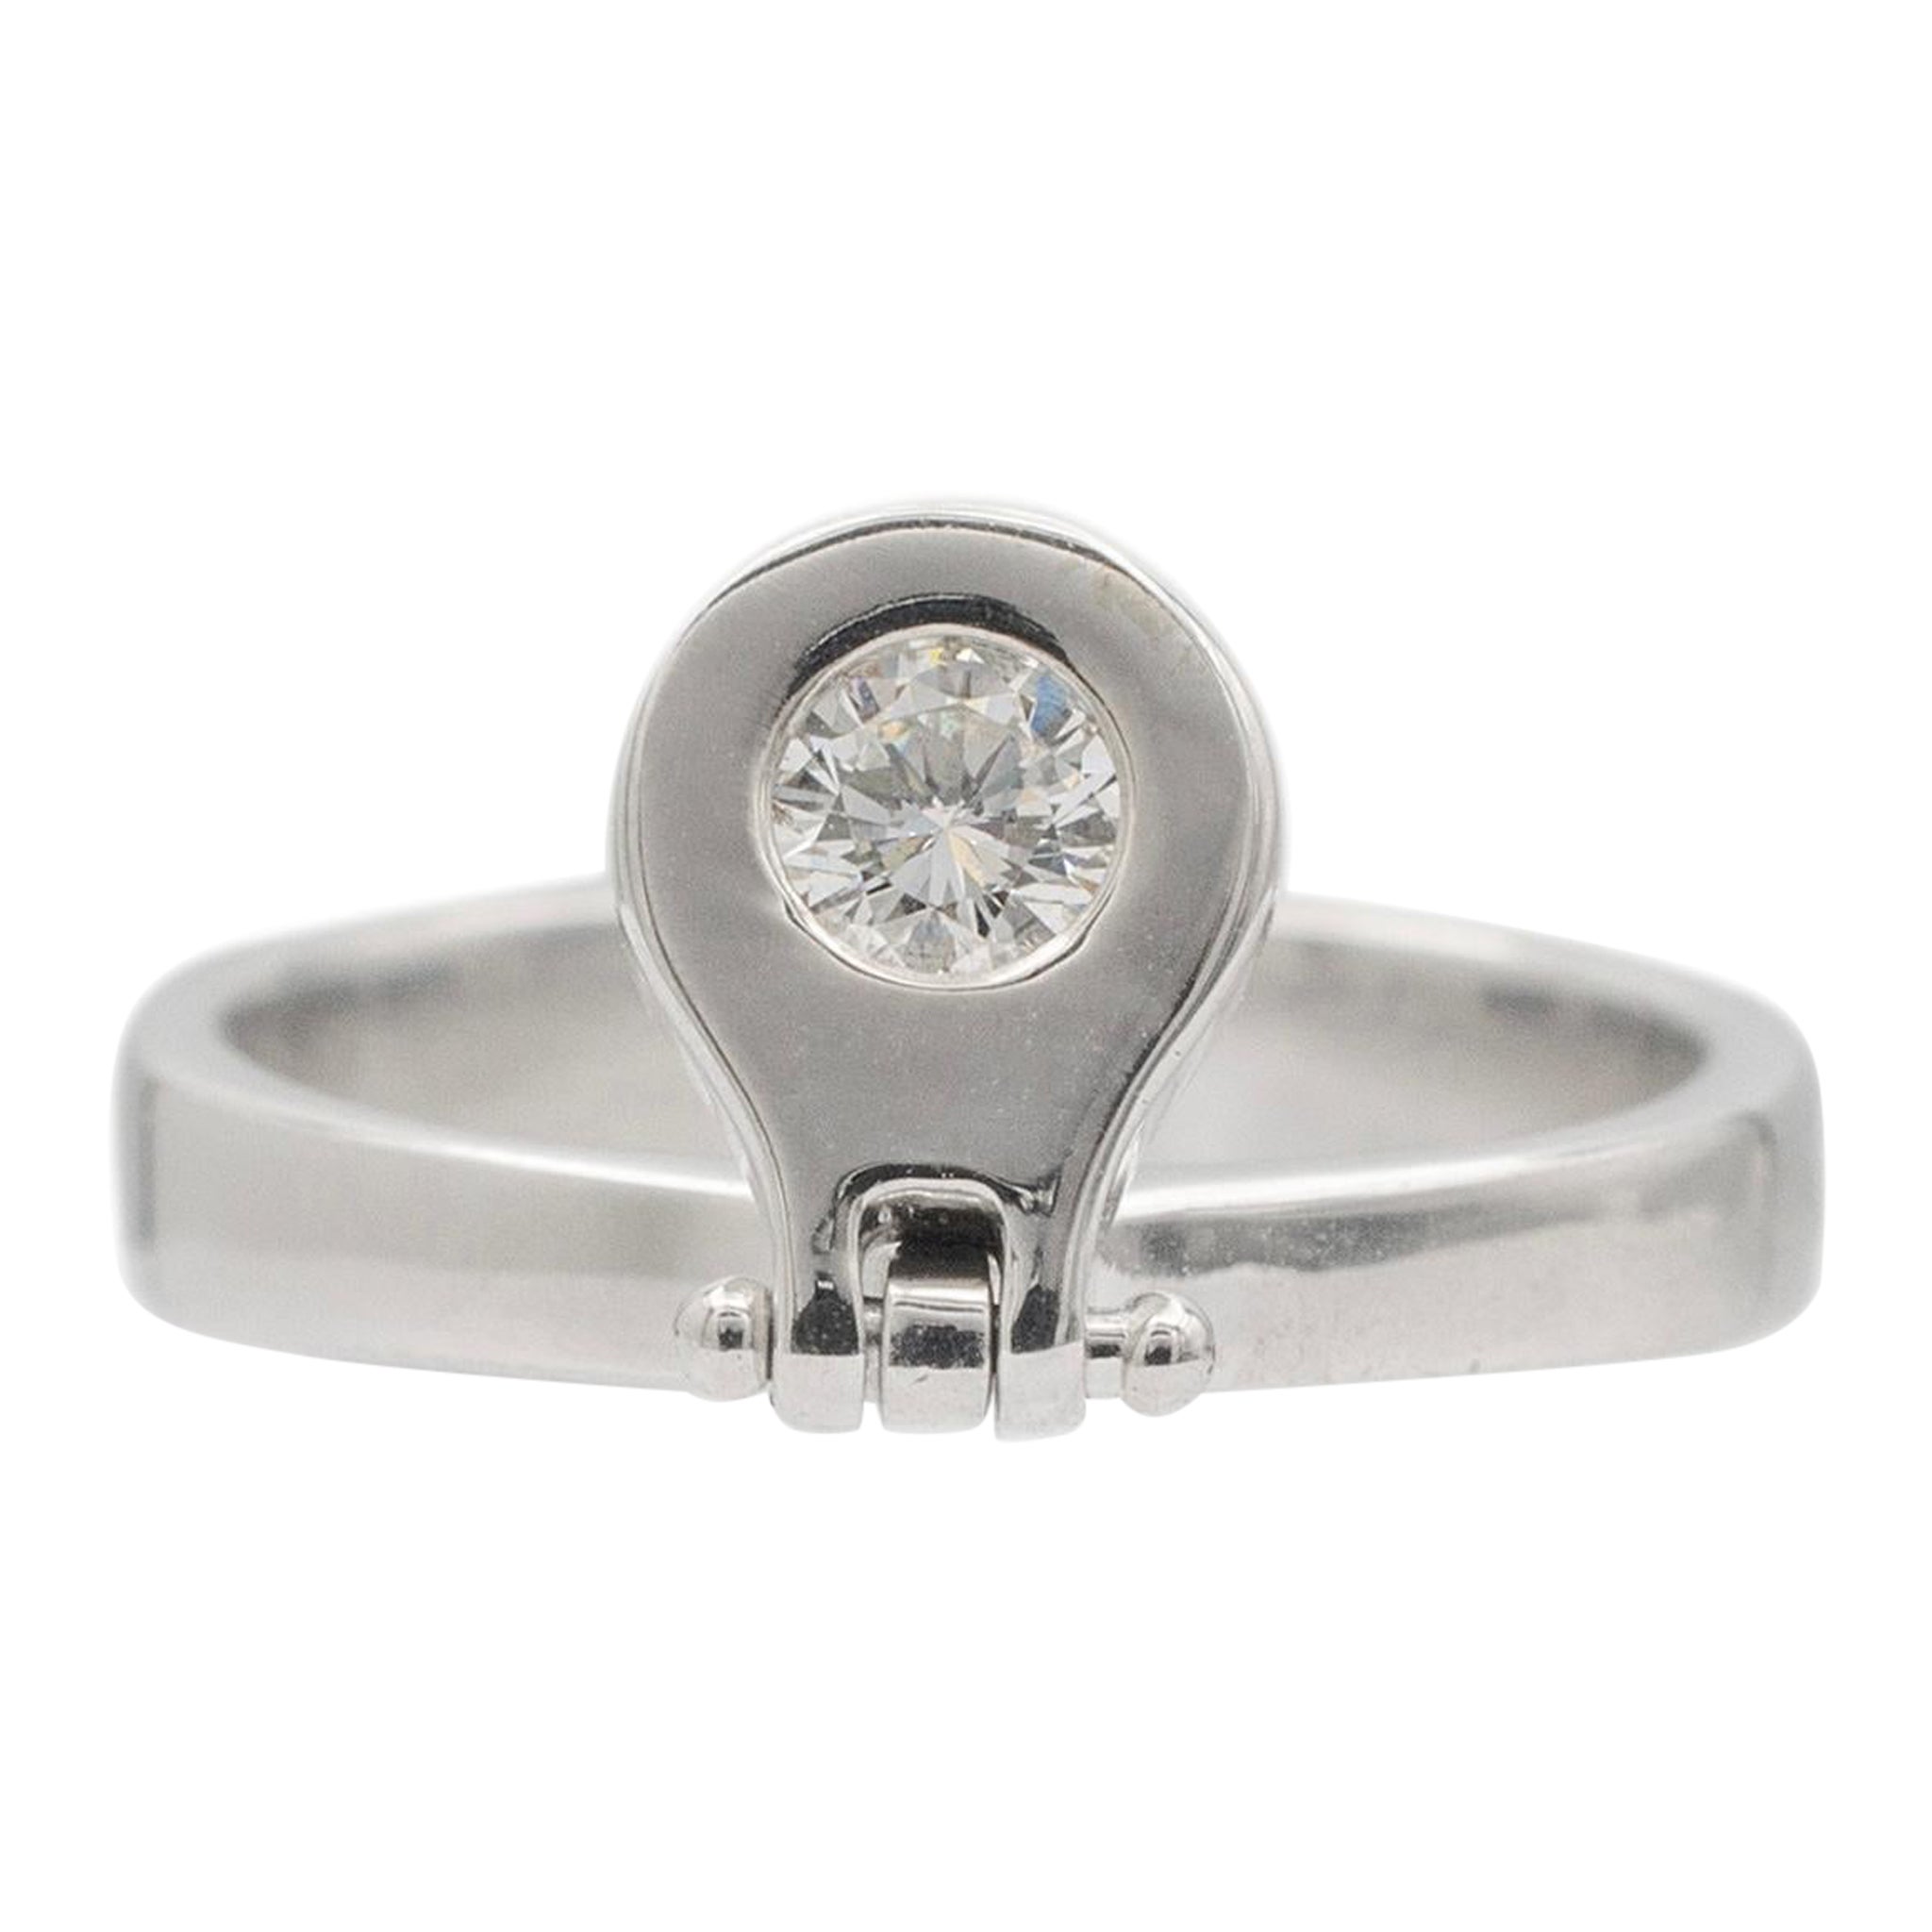 Ladies 18K White Gold Band With Diamond Drop Charm For Sale